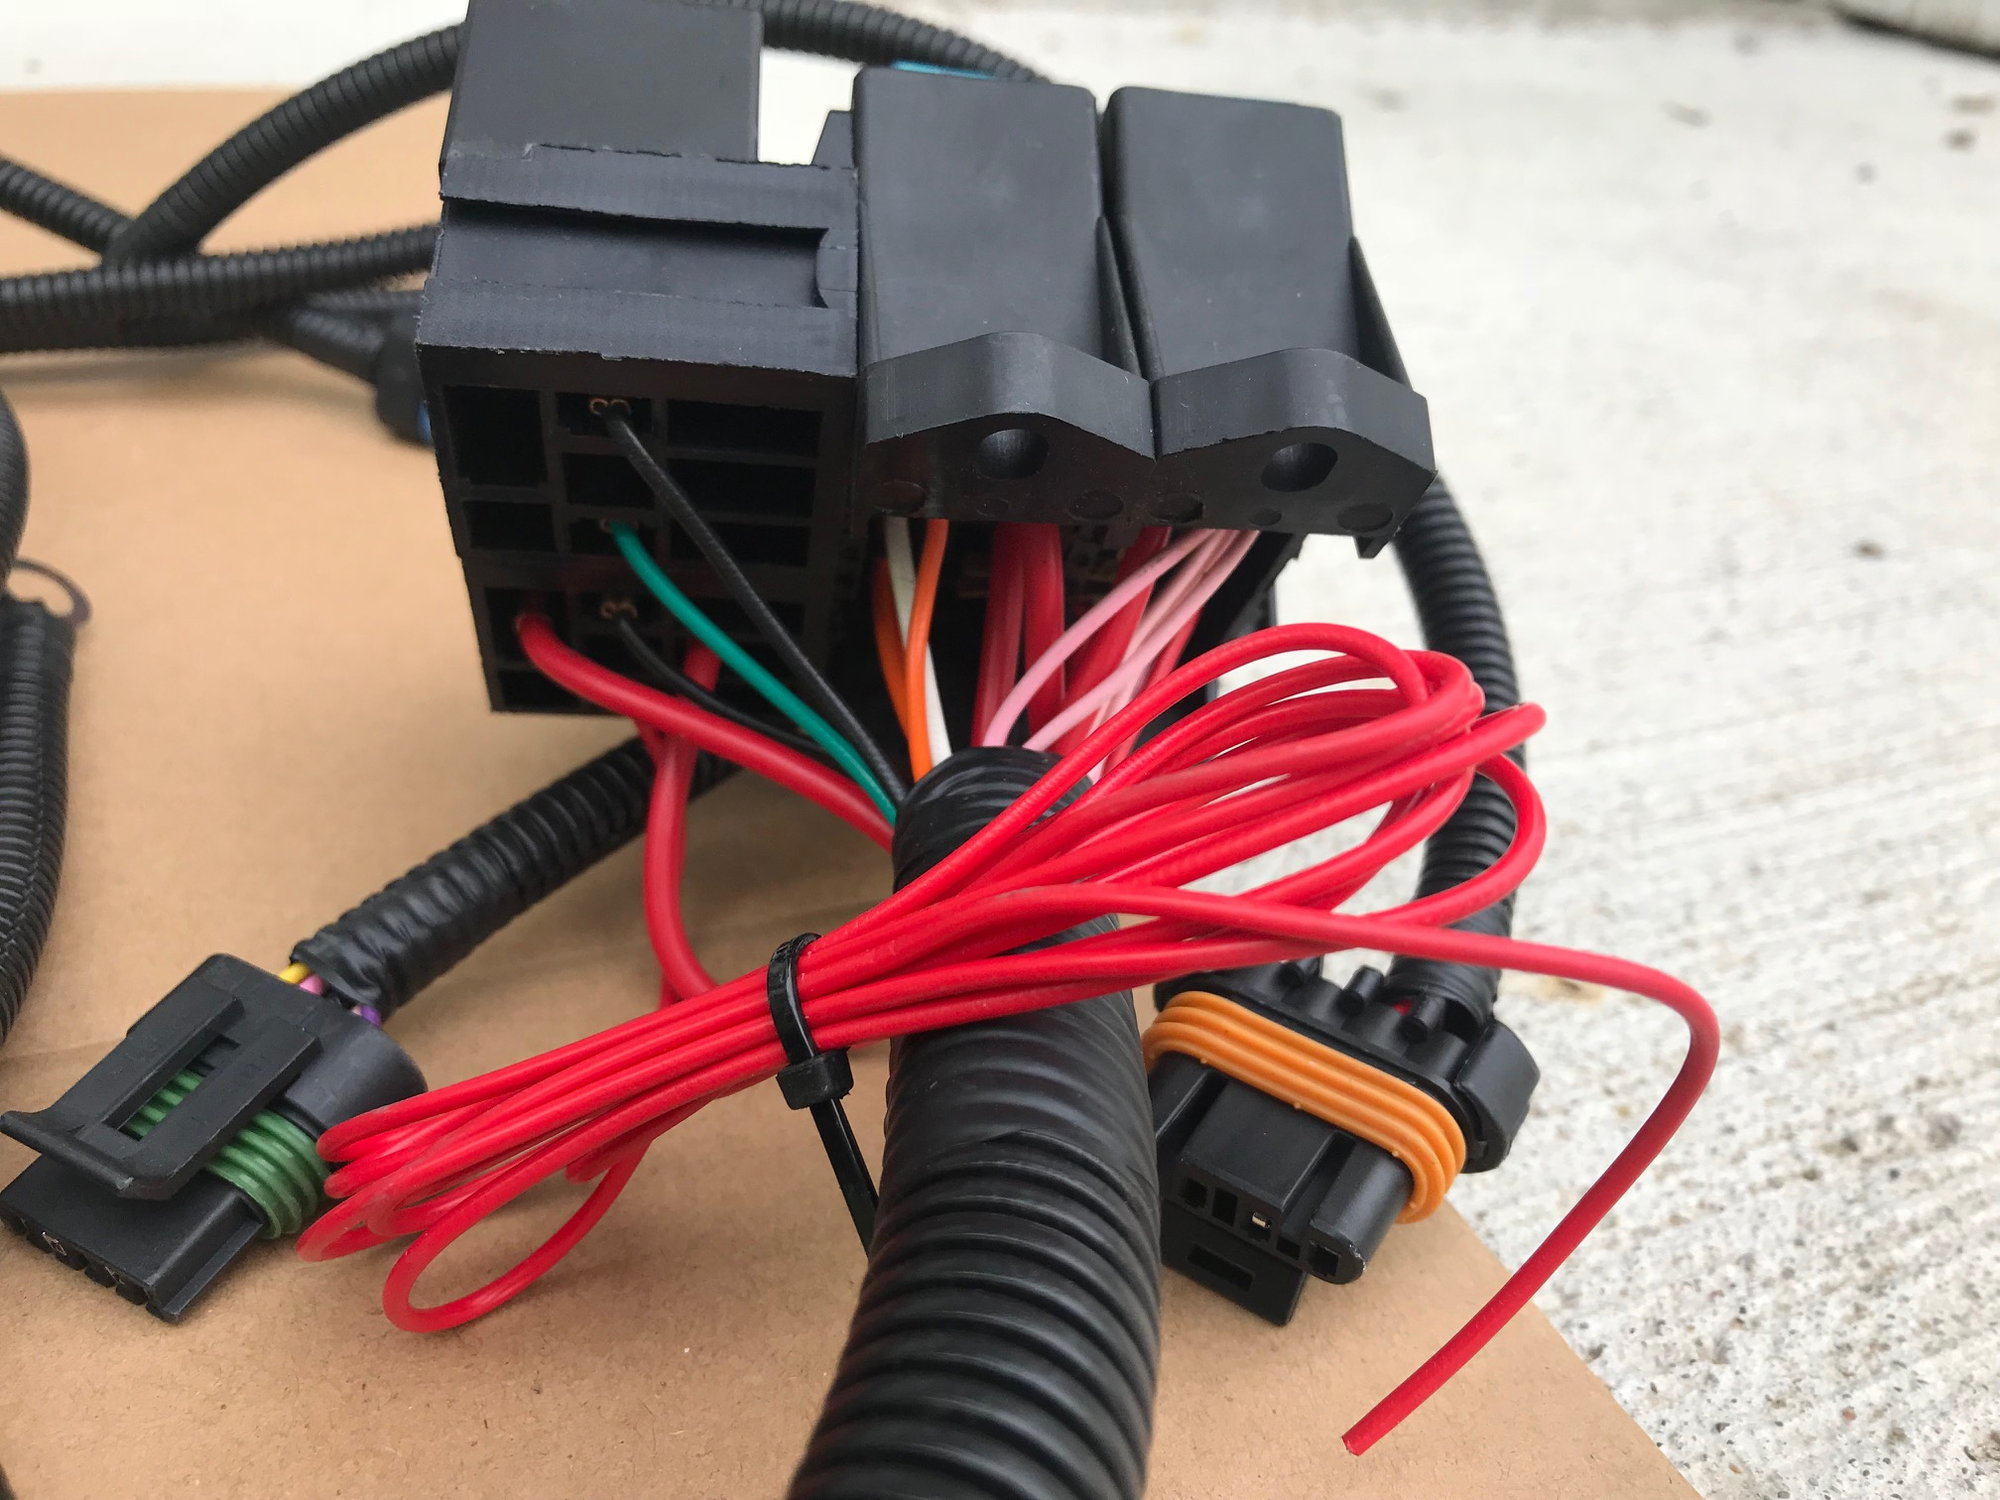  - New 1999-2003 LS Swap Standalone Wiring Harness for T56/TH350/TH400 - Indianapolis, IN 46077, United States